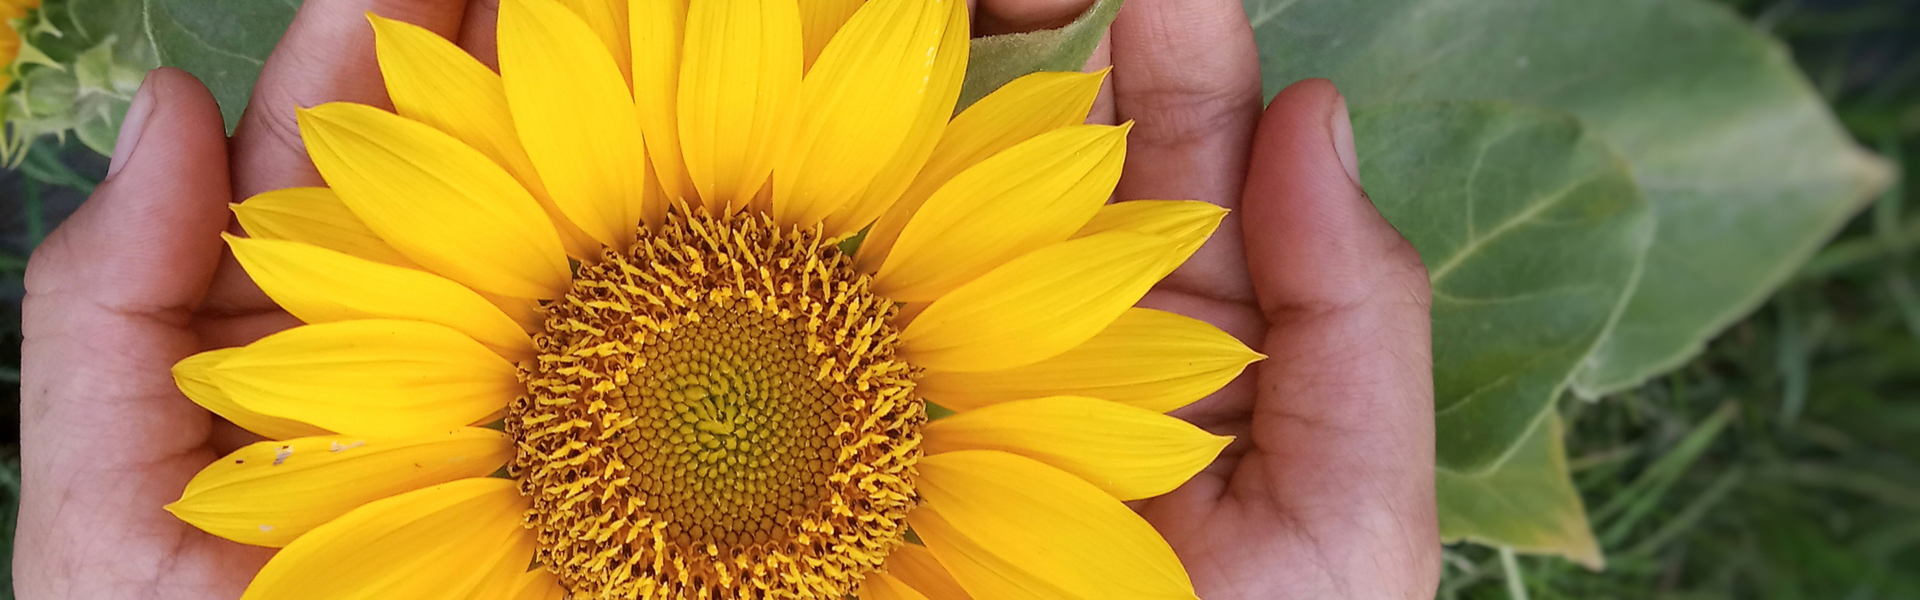 A pair of hands, palms up, hold a big sunflower. The flower has many oval-shaped yellow petals. Its rounded center has a band of little pistils that go all around the edge. 